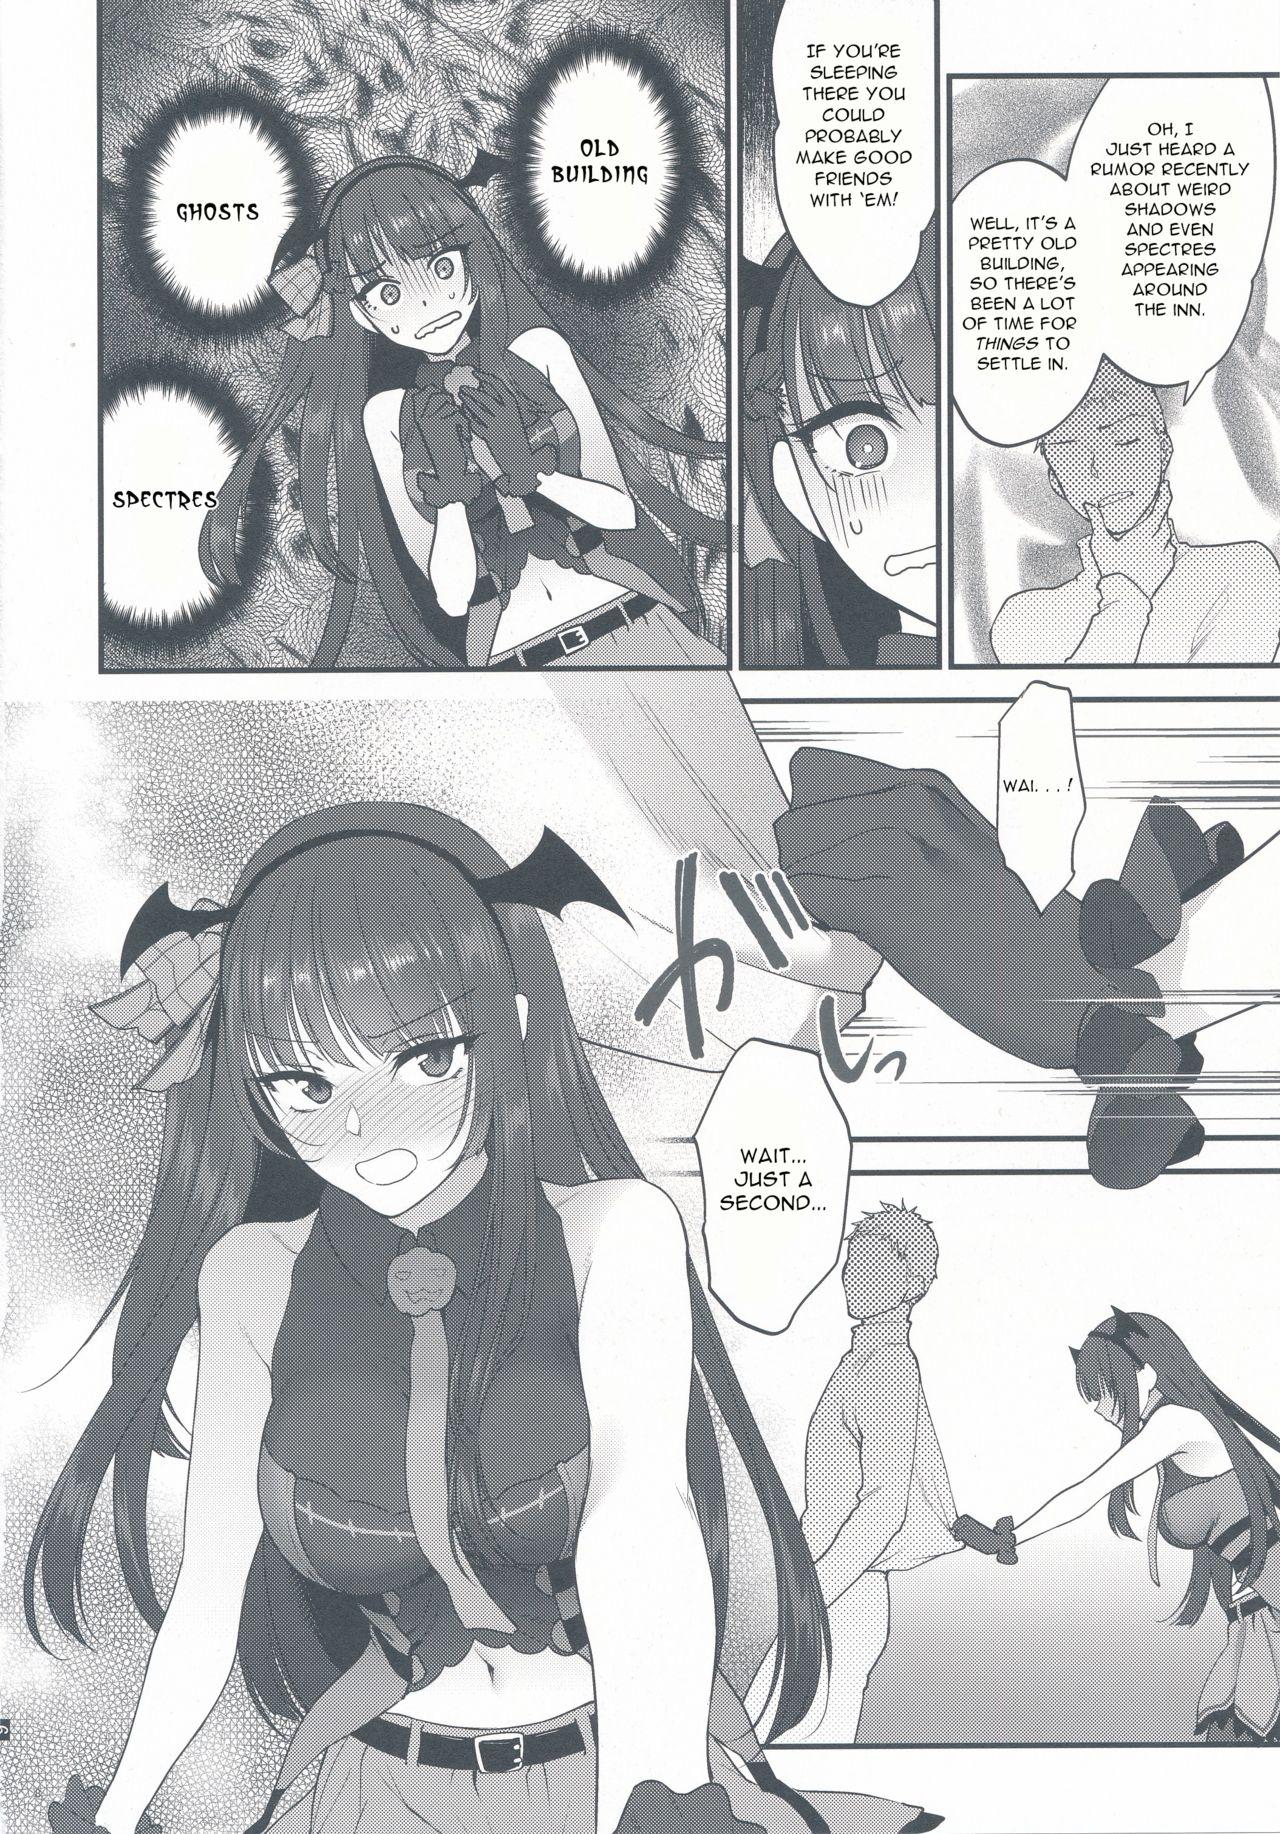 Group Sex Obake nante Inai! - Girls frontline Bwc - Page 8